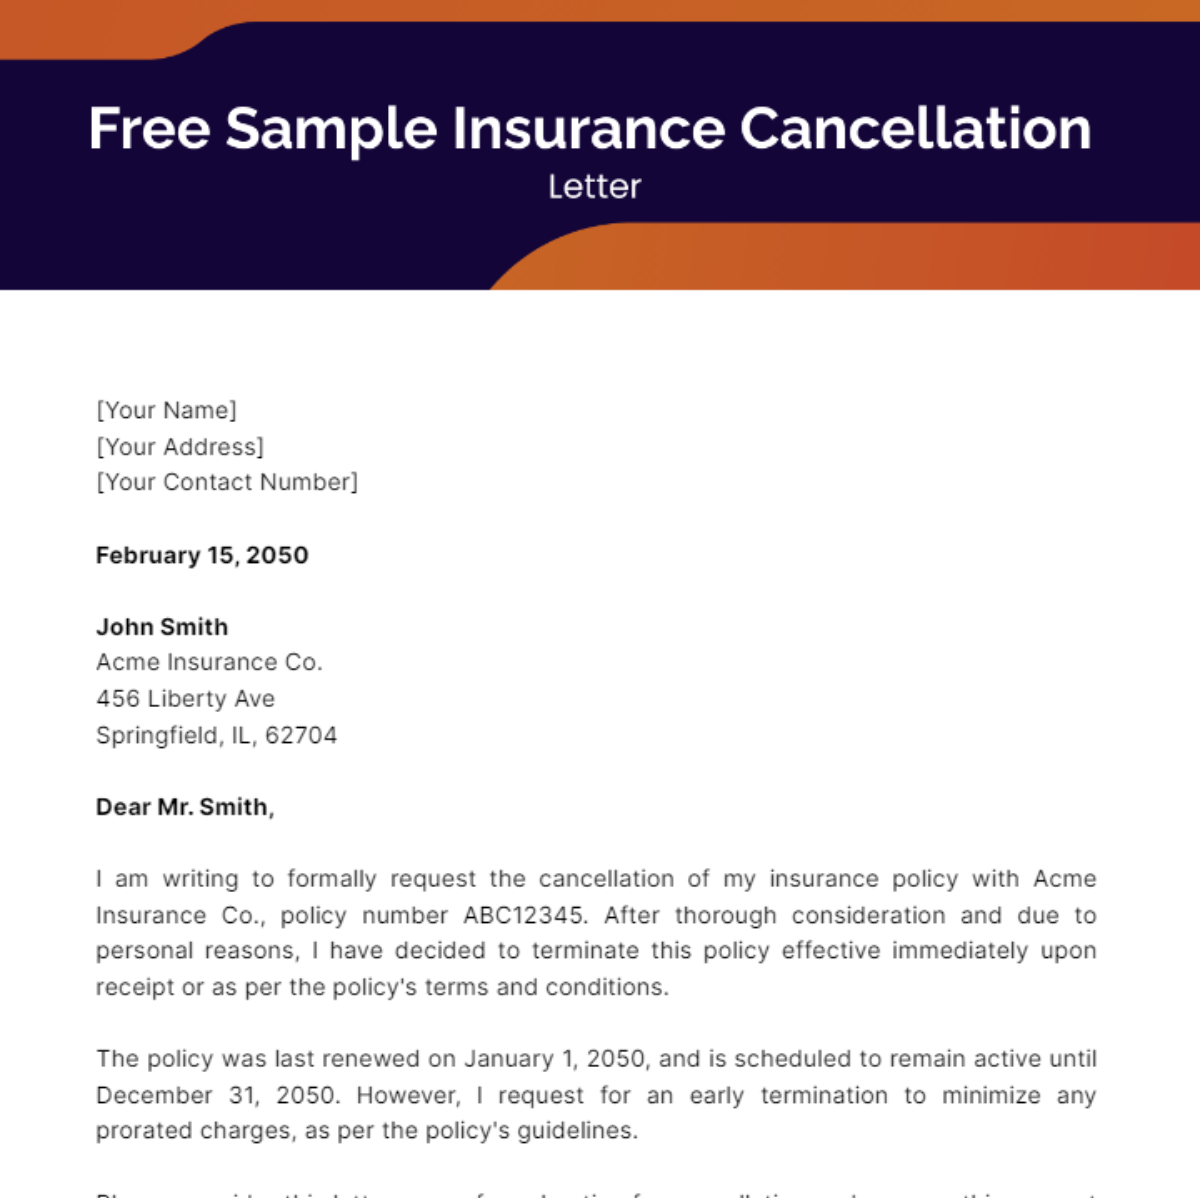 Sample Insurance Cancellation Letter Template